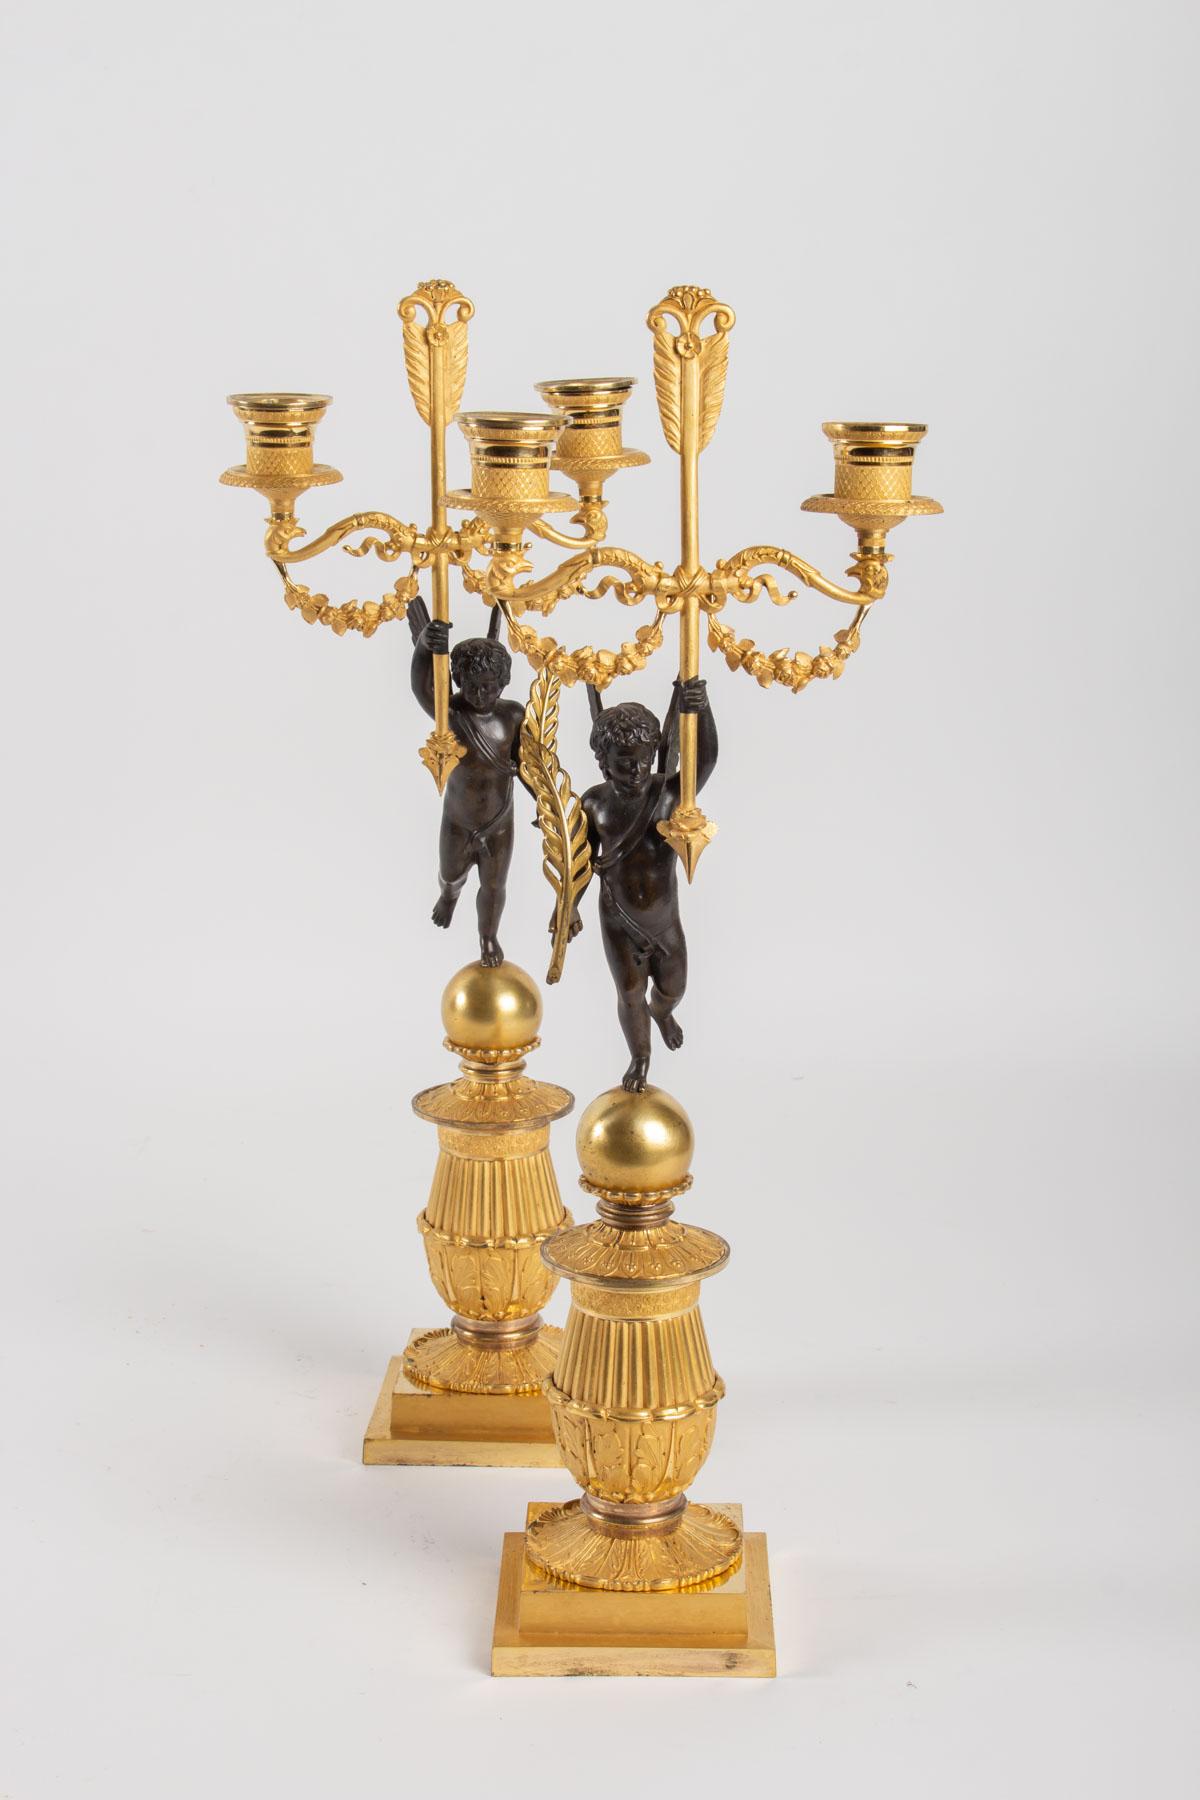 Pair of candelabra in gilt bronze and patinated, 19th century, Miss A bobeche
Measures: H 46cm, W 17cm, W 14cm.